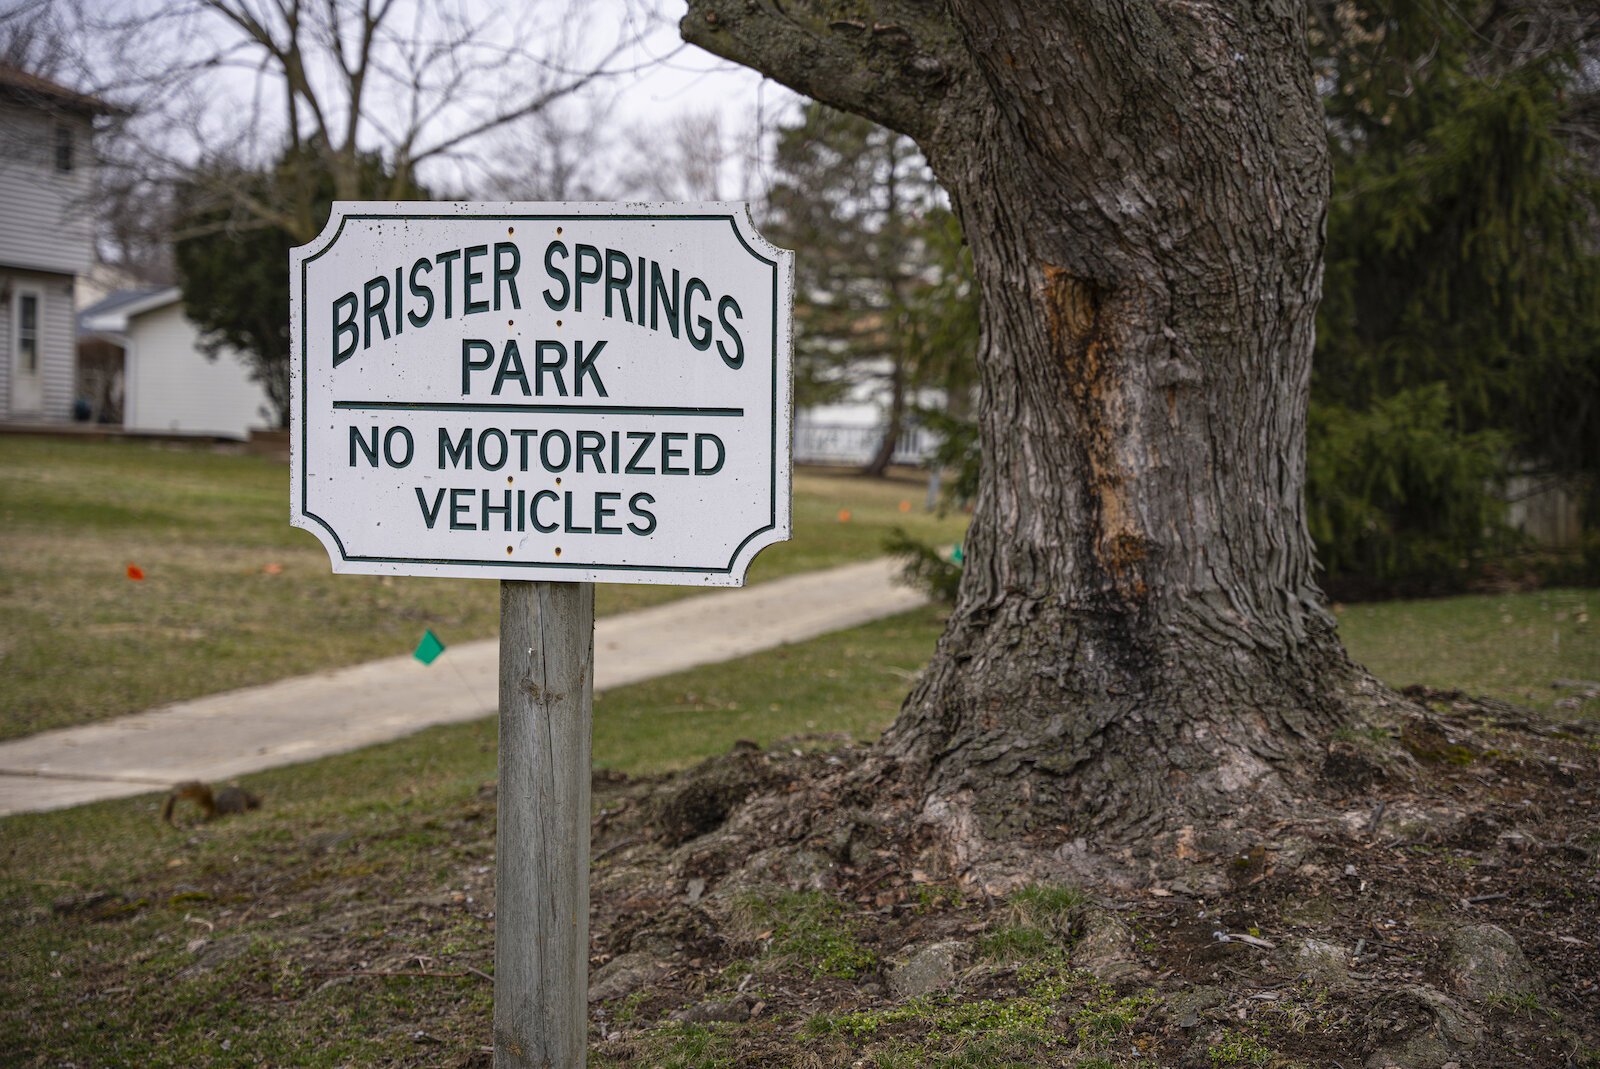 Brister Spring Park, in the Walden Neighborhood, is not a city park. Rather, it was created by the developers of the subdivision. While this public space offers a place of recreation, its acreage does not count toward national surveys and rankings.